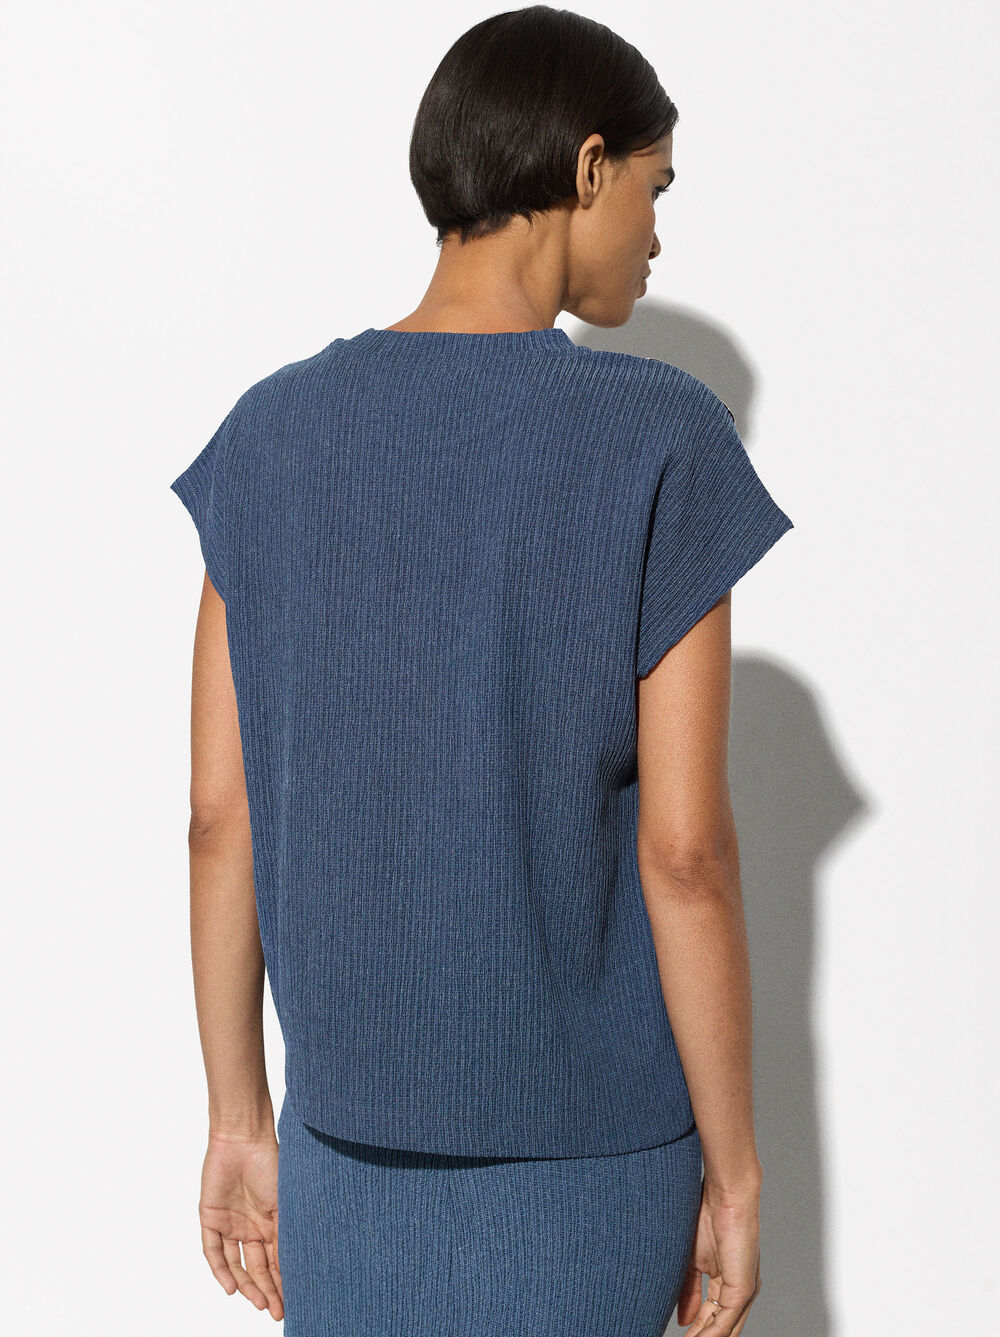 Textured T-Shirt With Shoulder Buttons image number 4.0